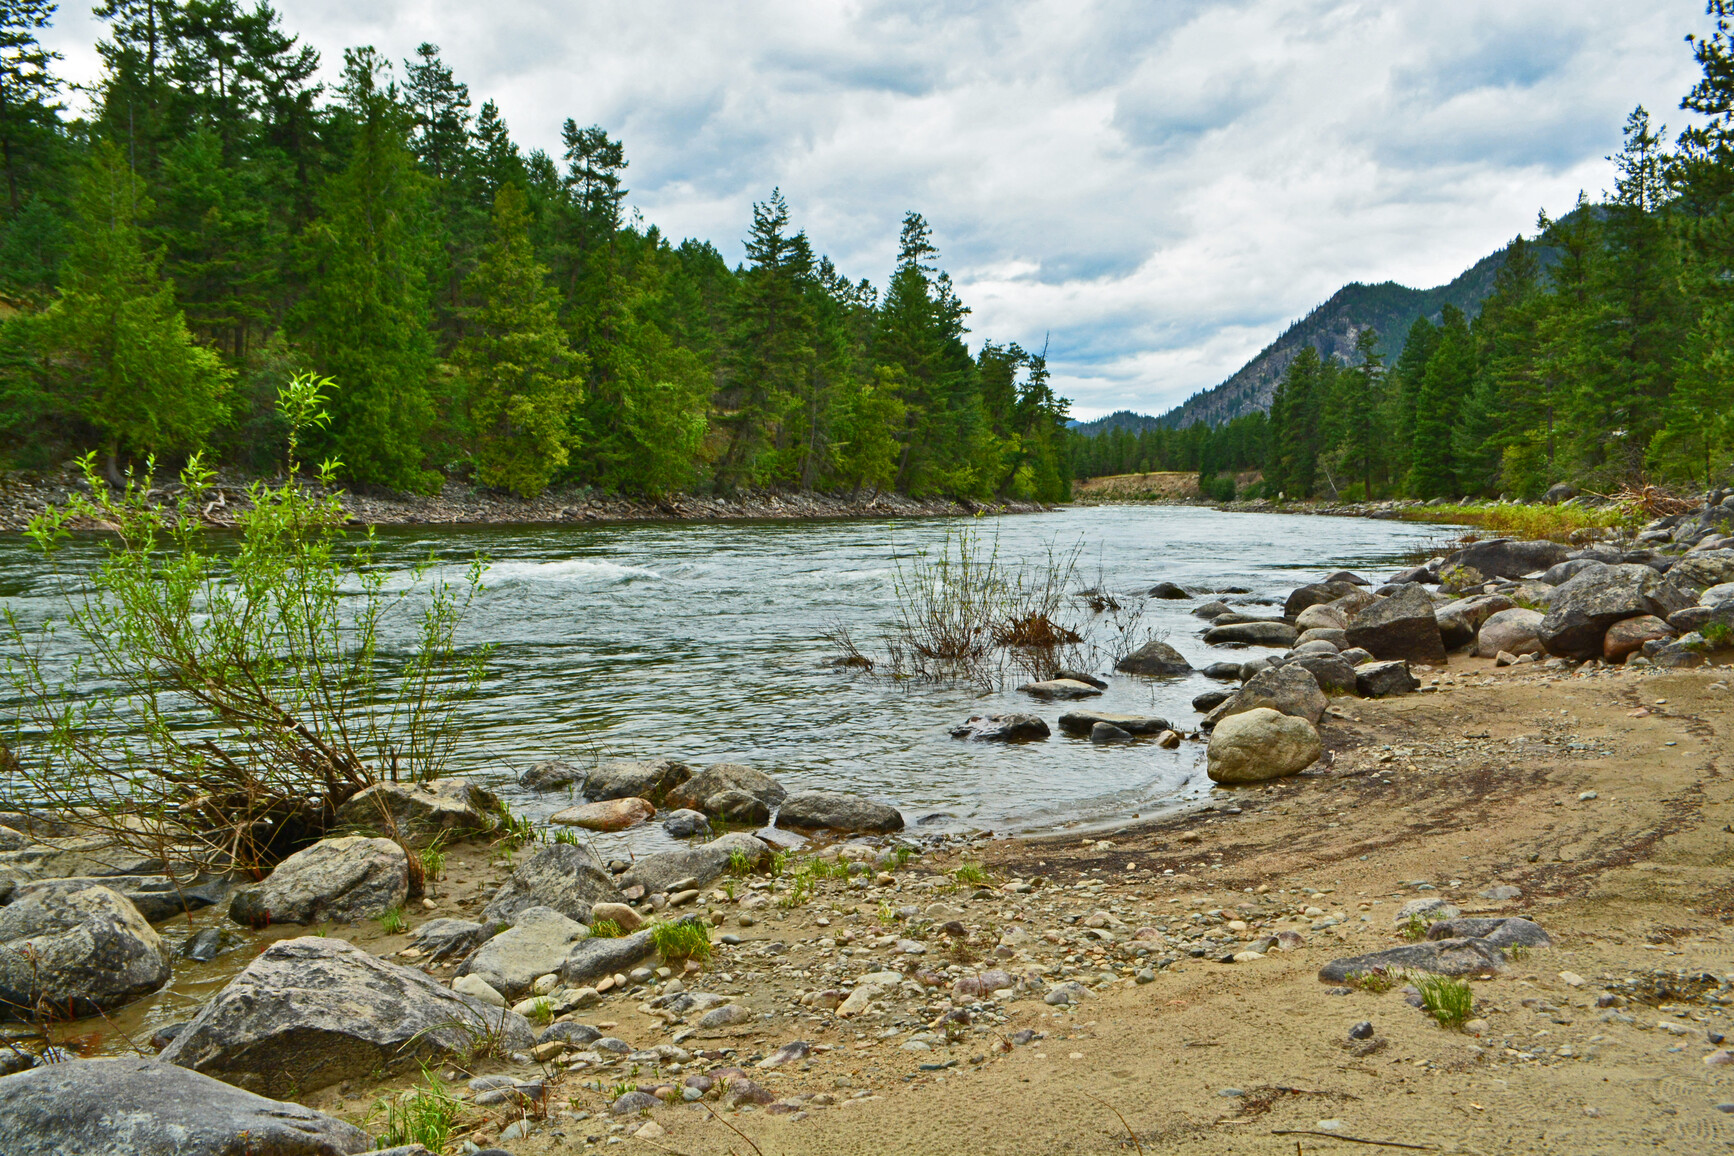 Similkameen River - A rocky shoreline with trees, forest and mountains in the background.